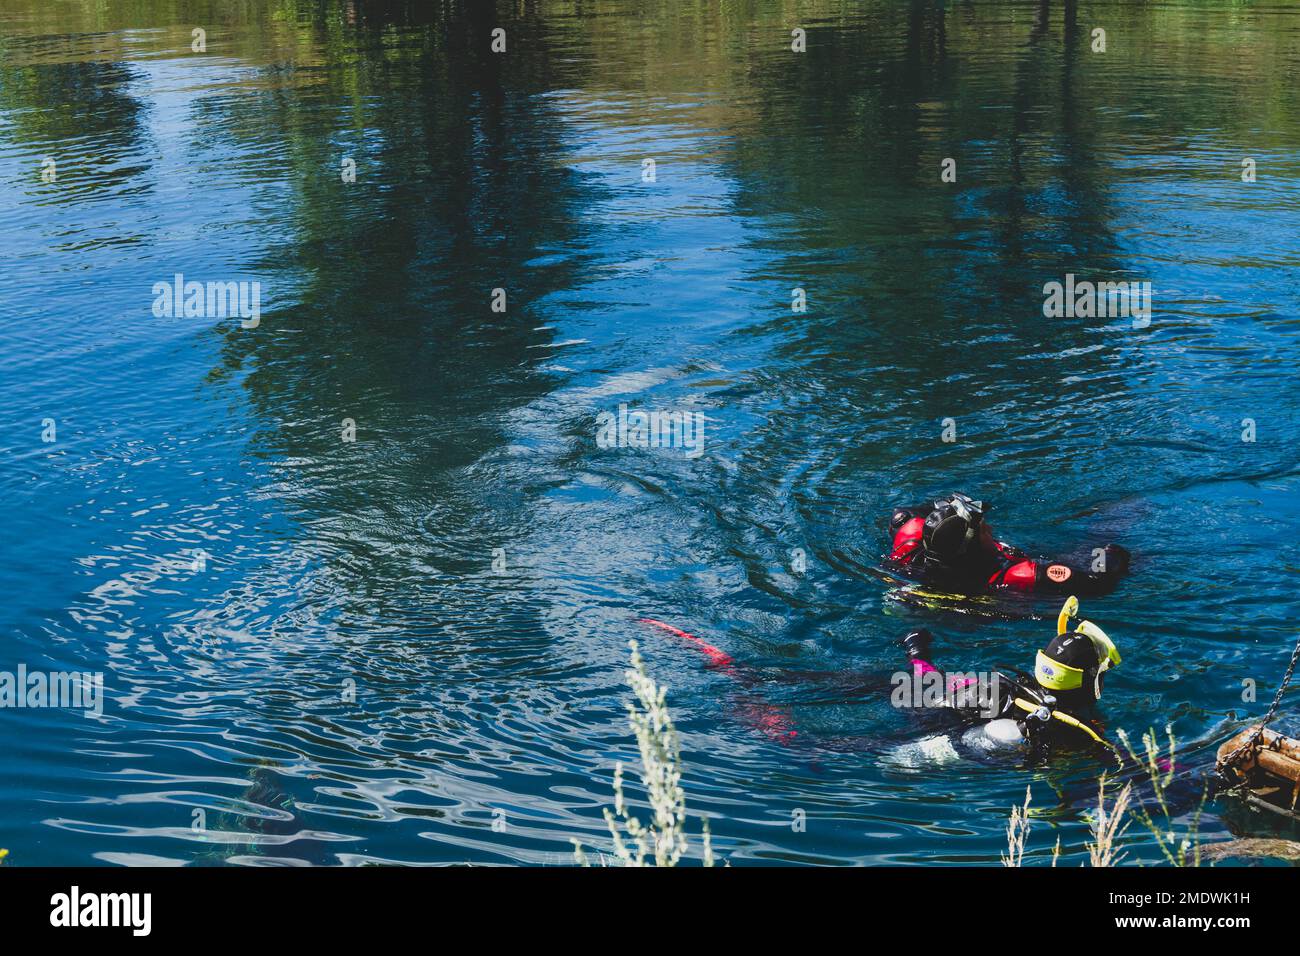 Divers in water. Study of river bottom. Search for missing people. Lifting drowned cargo to surface. People in water. Stock Photo